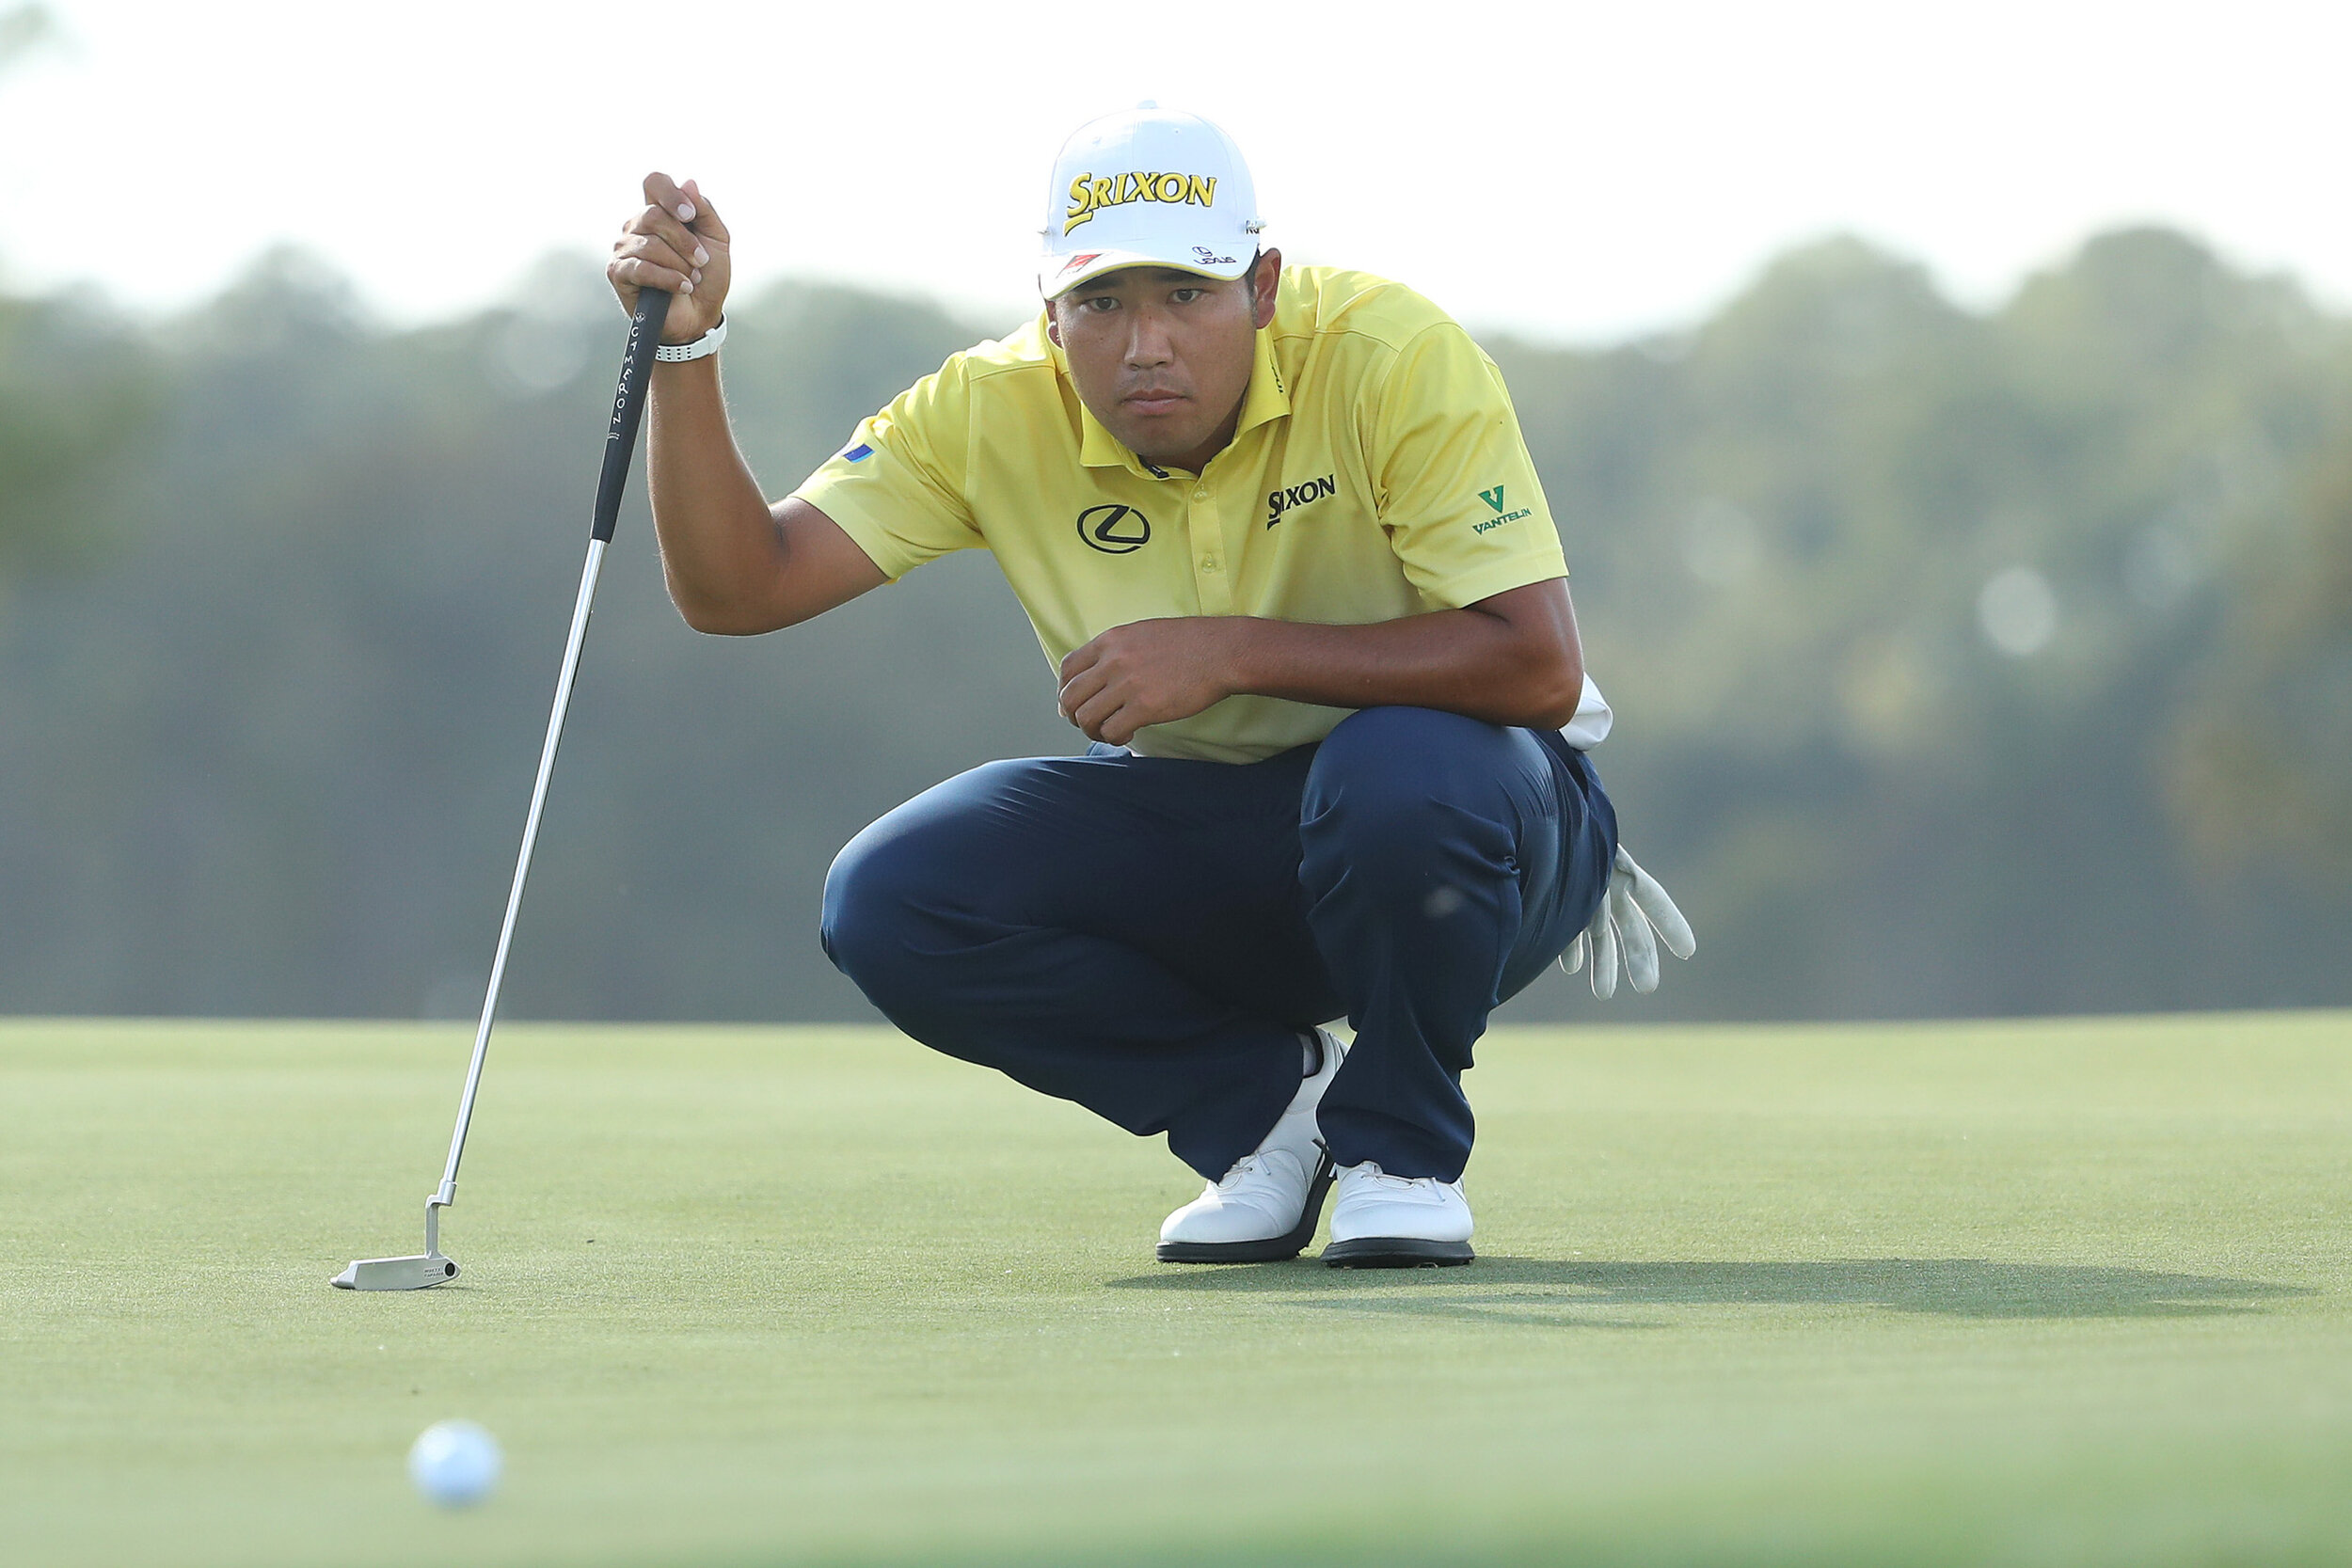  HOUSTON, TEXAS - NOVEMBER 08: Hideki Matsuyama of Japan looks over a putt on the 18th green during the final round of the Houston Open at Memorial Park Golf Course on November 08, 2020 in Houston, Texas. (Photo by Maddie Meyer/Getty Images) 